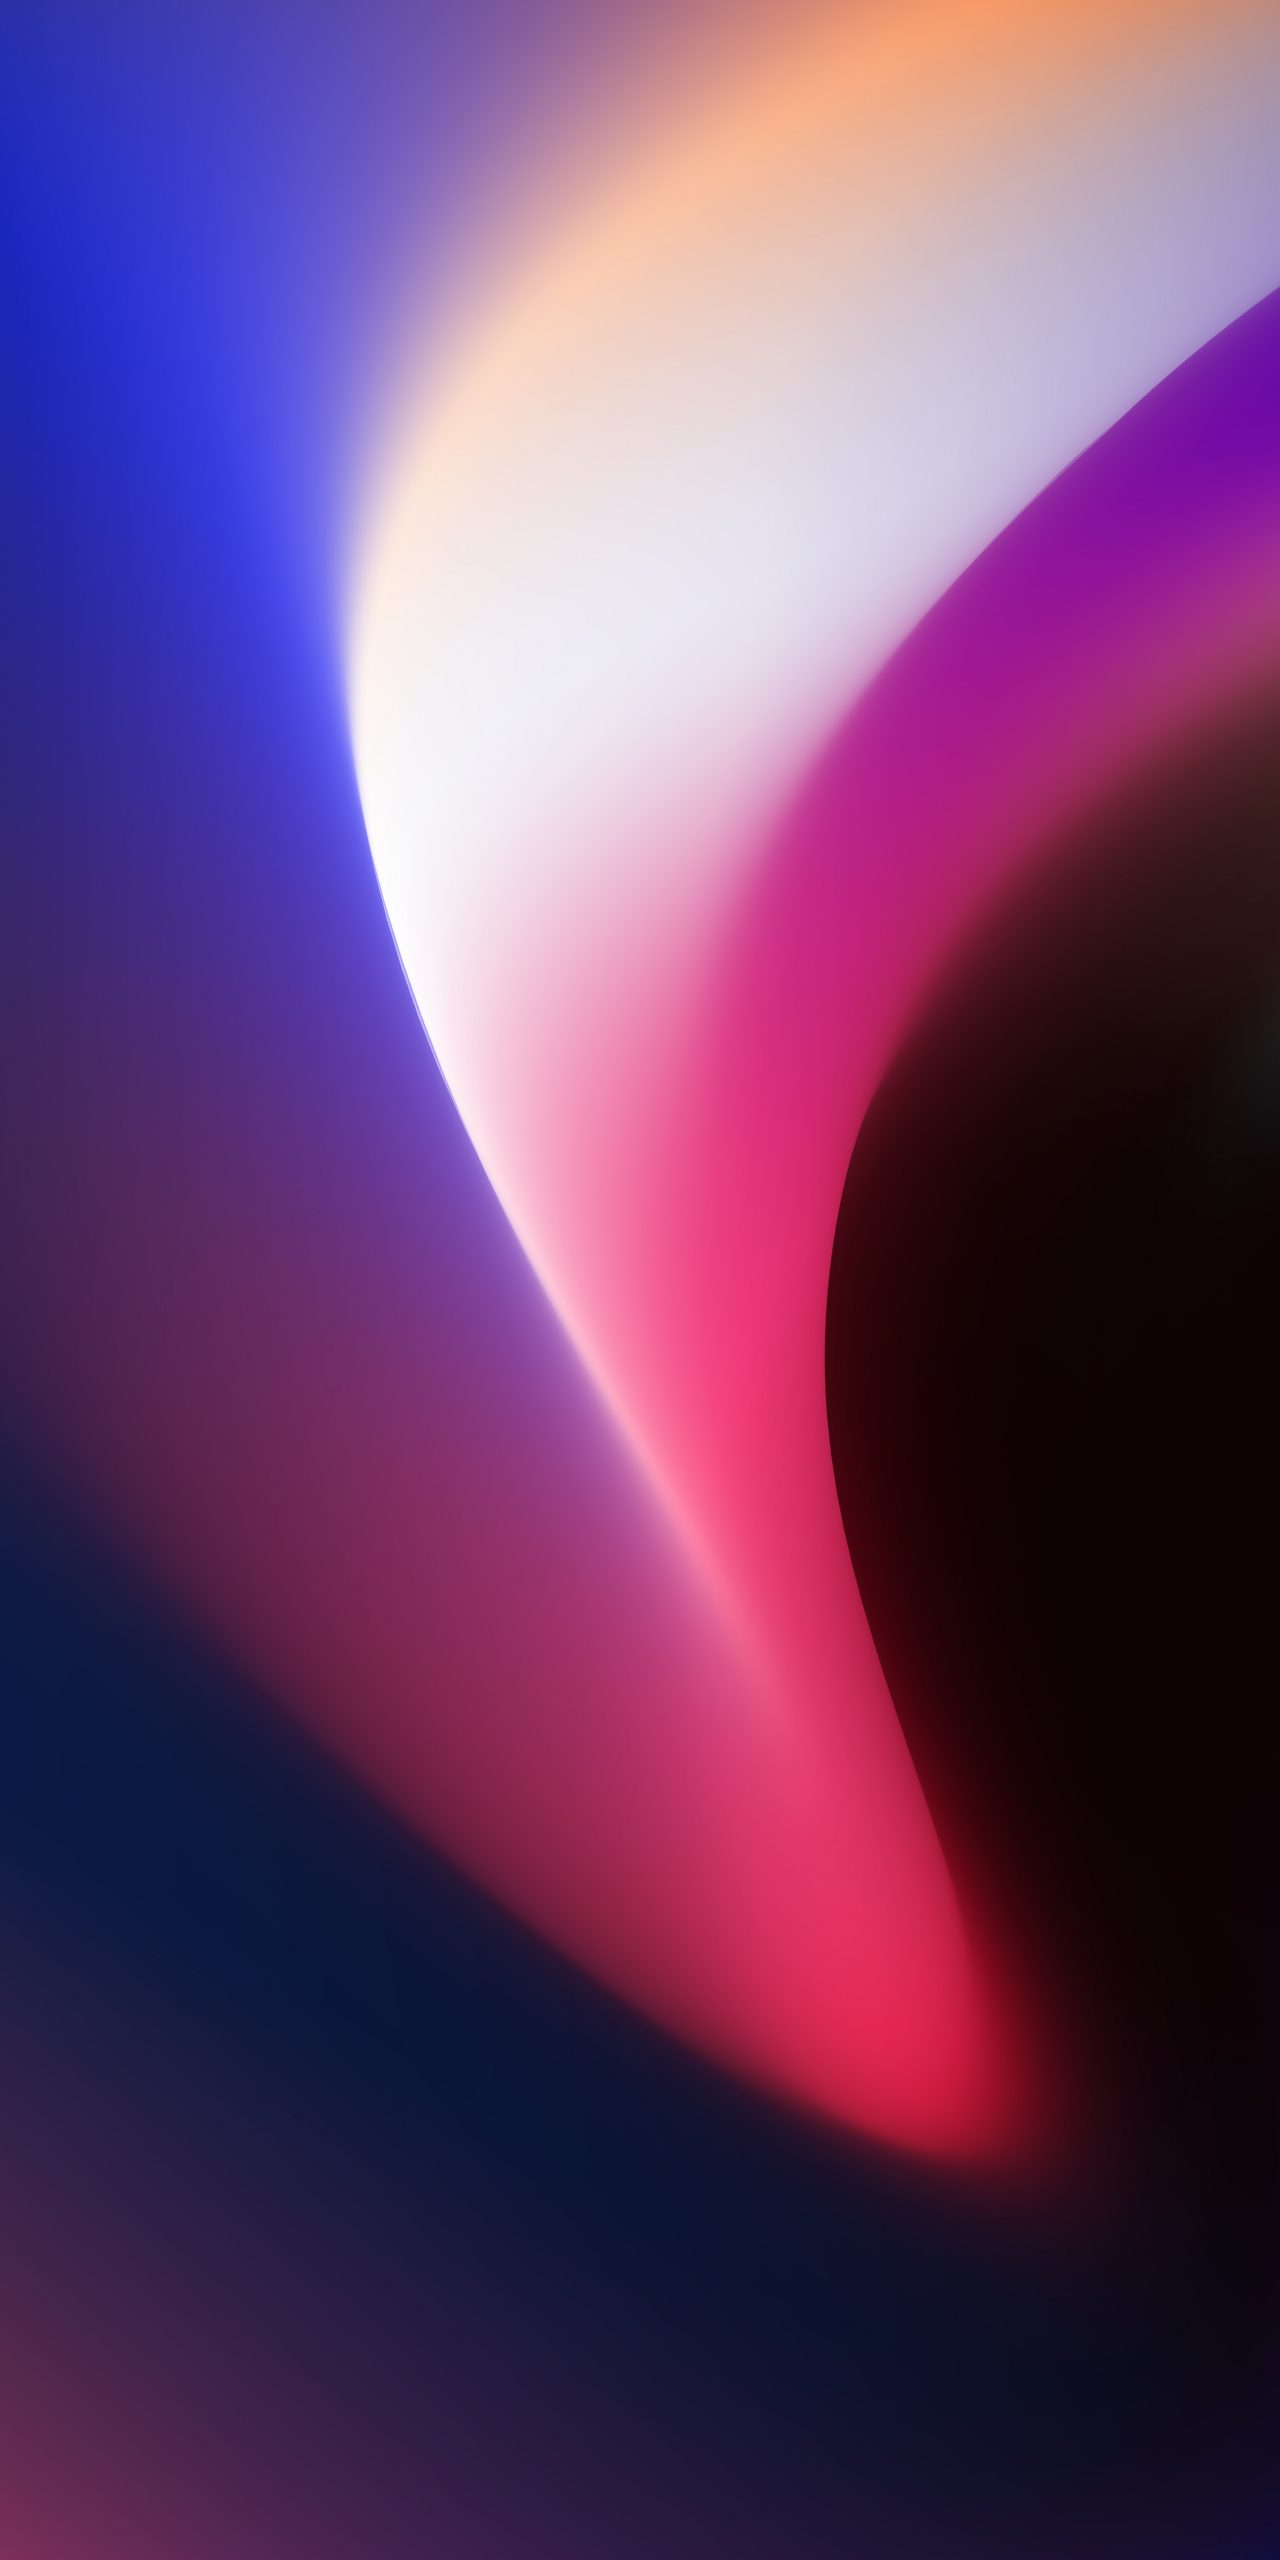 Old gradient iOS wallpaper optimized for iPhone X  riphonexwallpapers